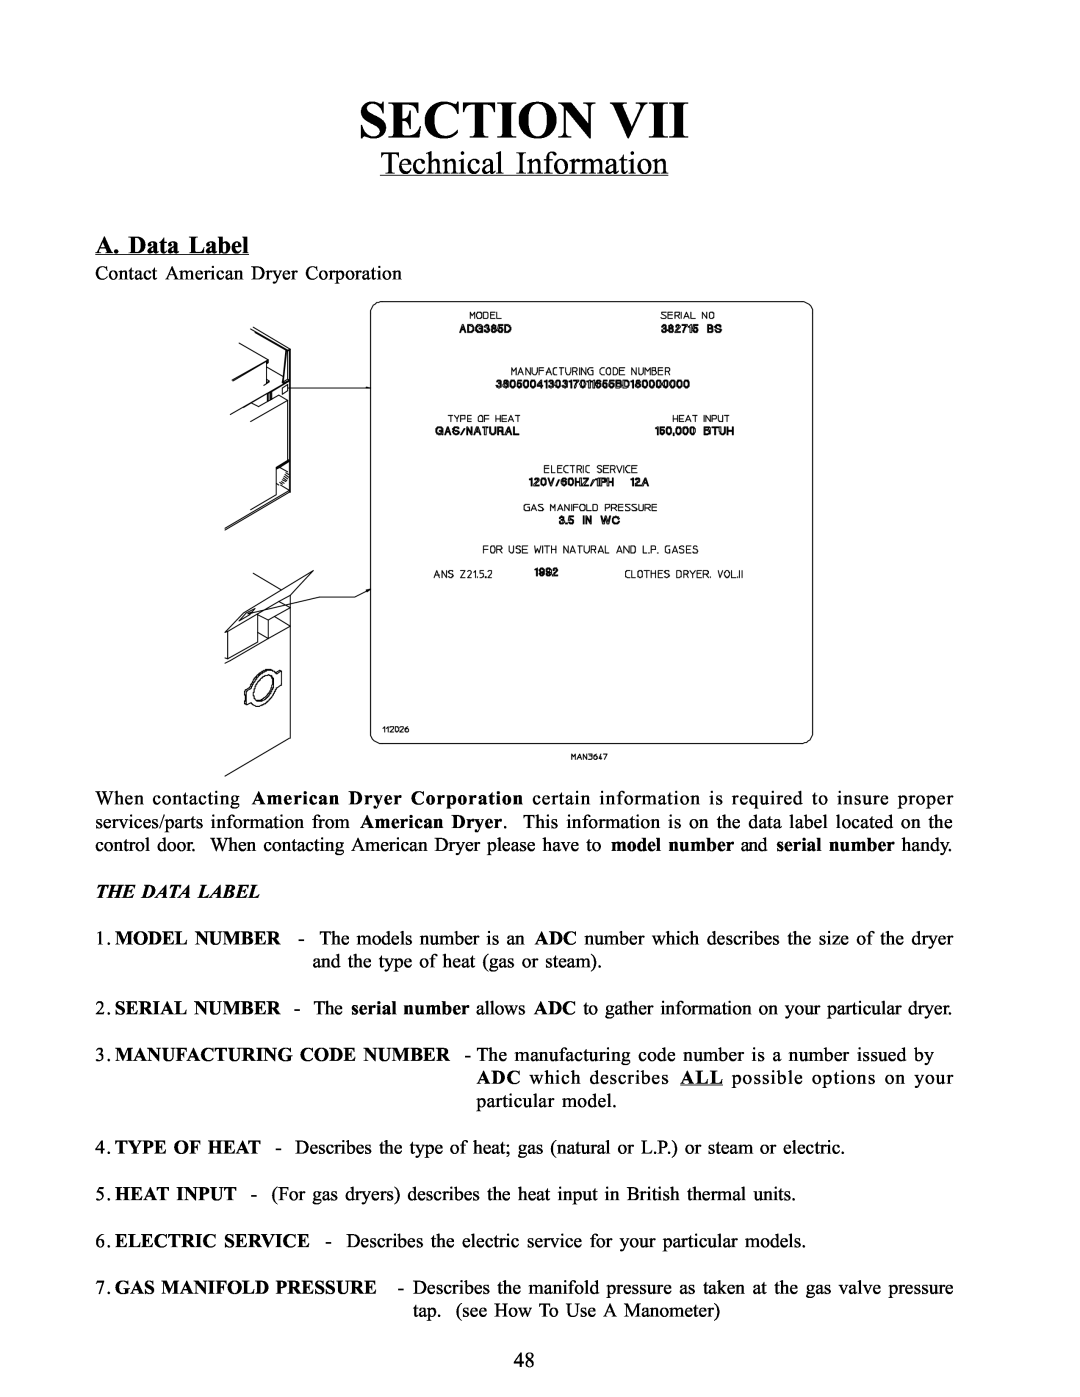 American Dryer Corp WDA-385 service manual Technical Information, A. Data Label, Section 